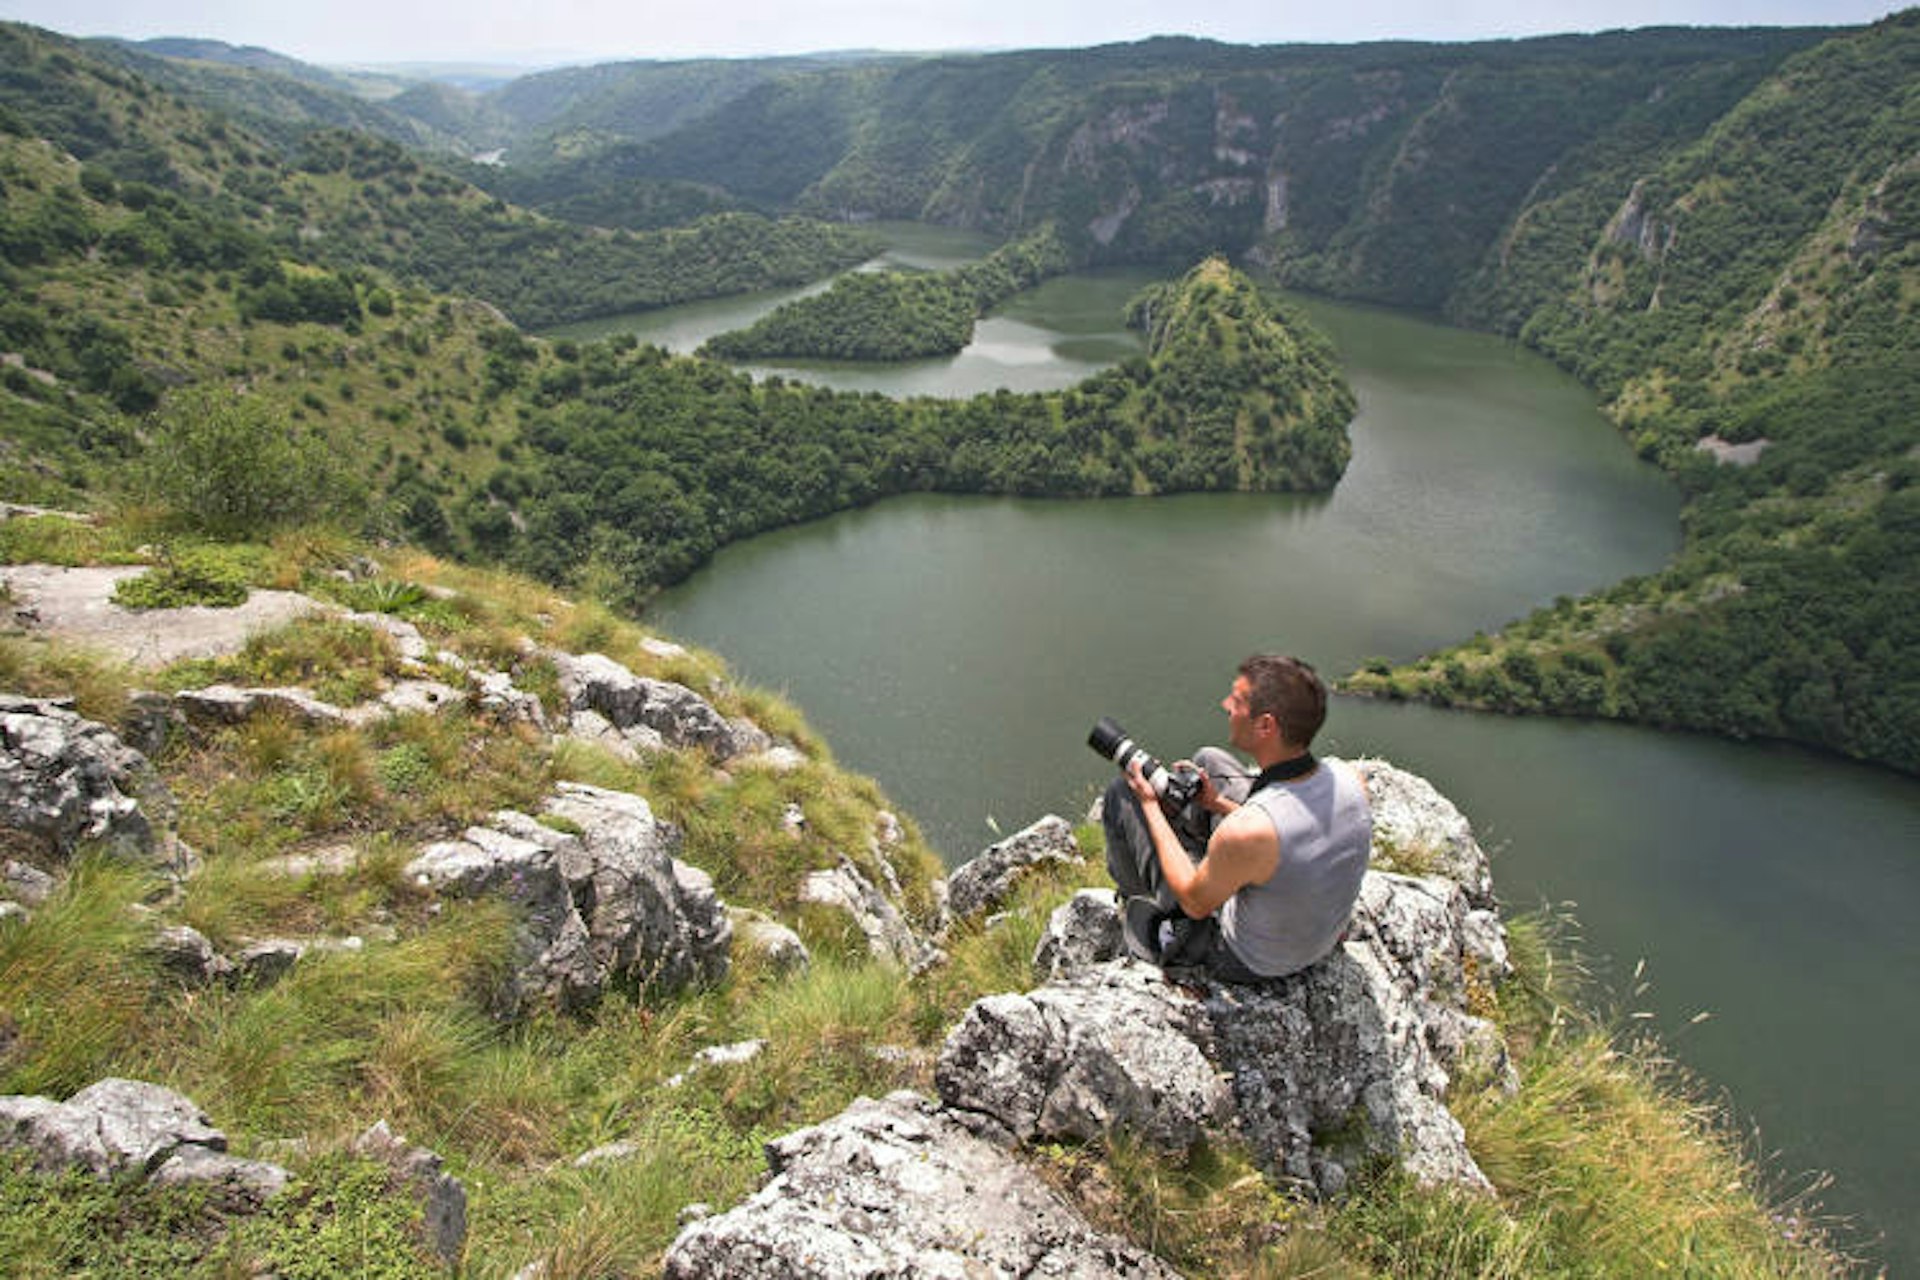 The vulture habitat of Uvac river gorge. Image by Dragan Bosnić / Courtesy of National Tourism Organisation of Serbia